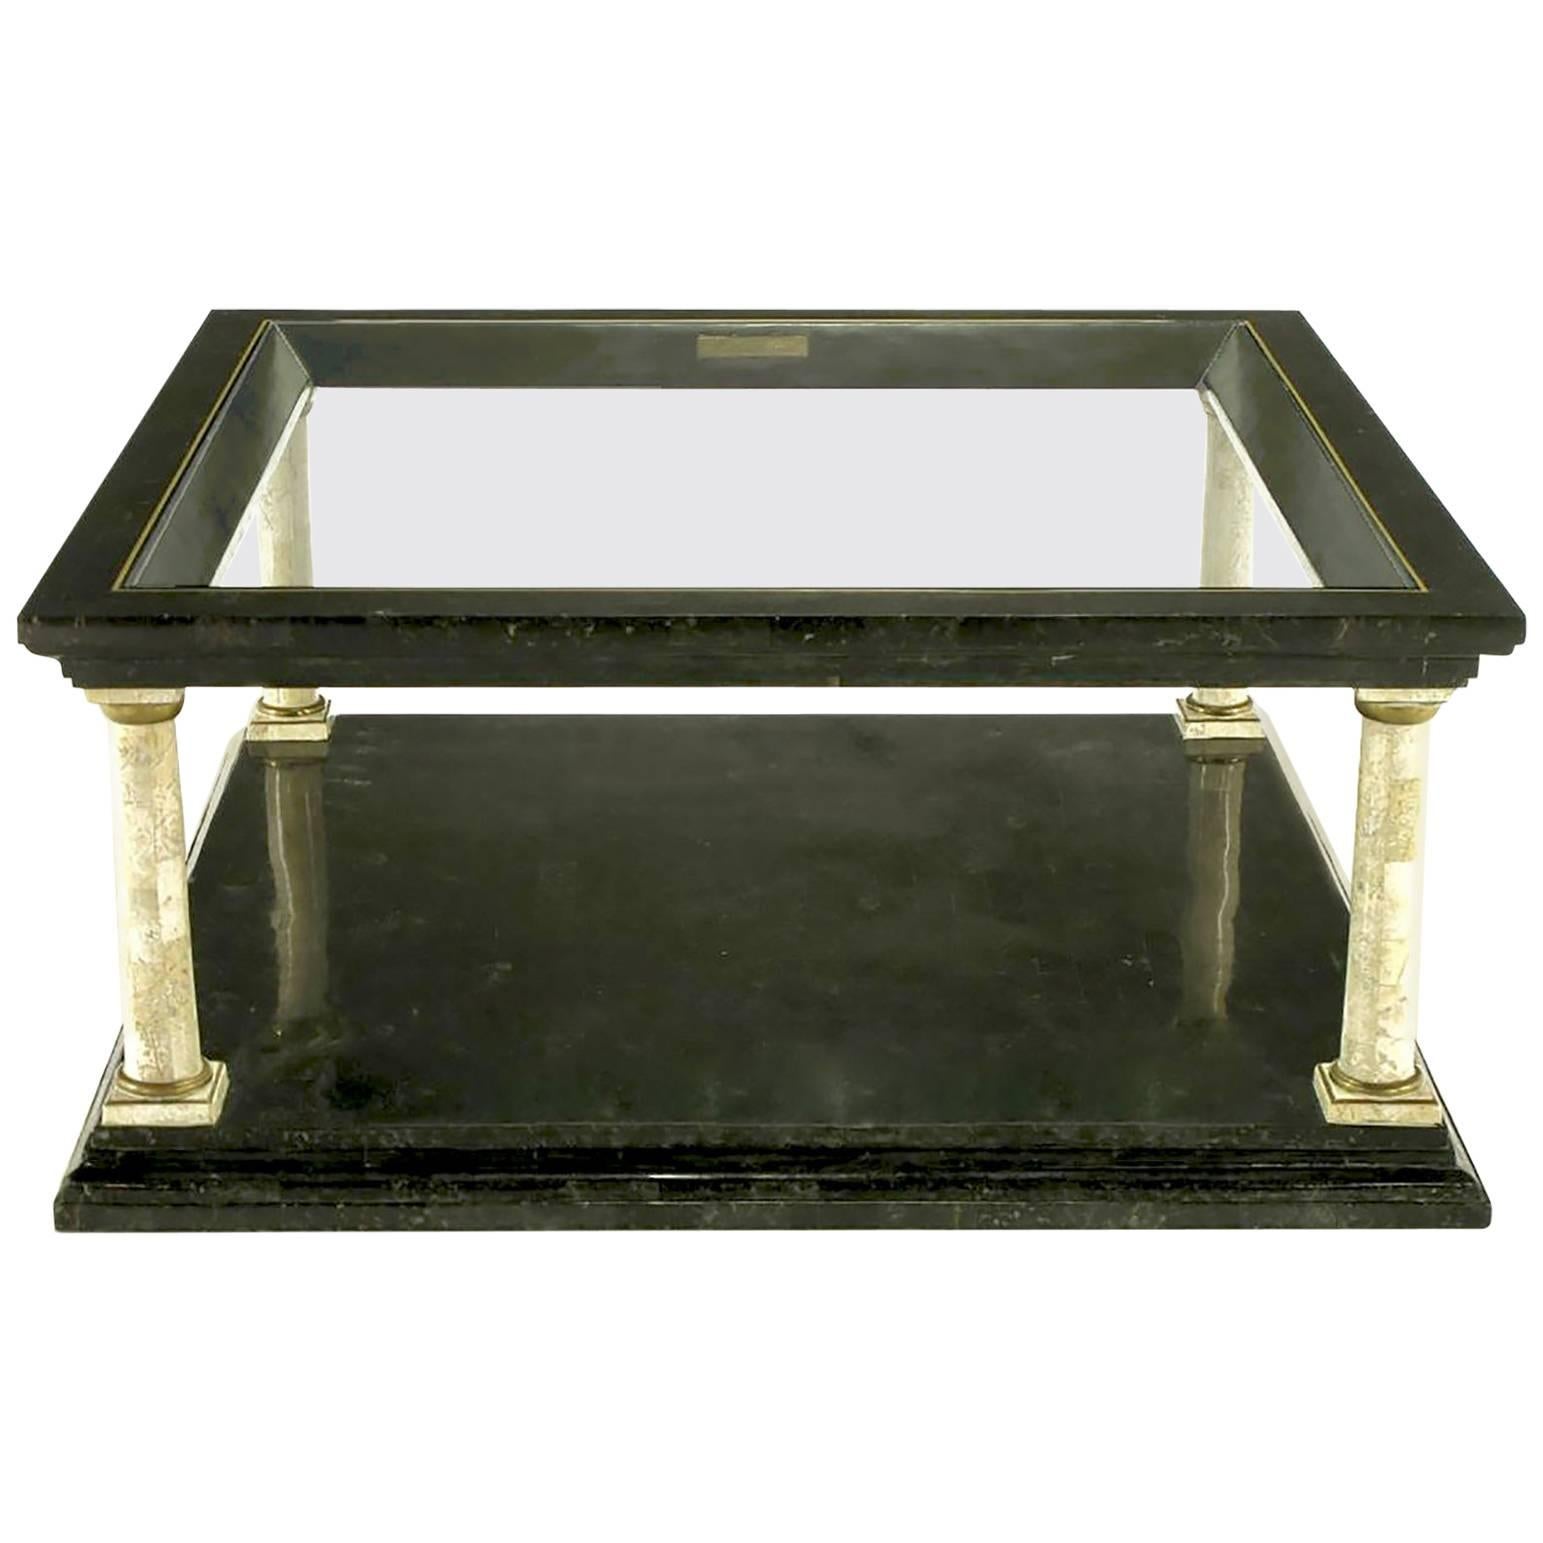 Maitland-Smith Empire Revival Black Marble and Fossil Stone Coffee Table